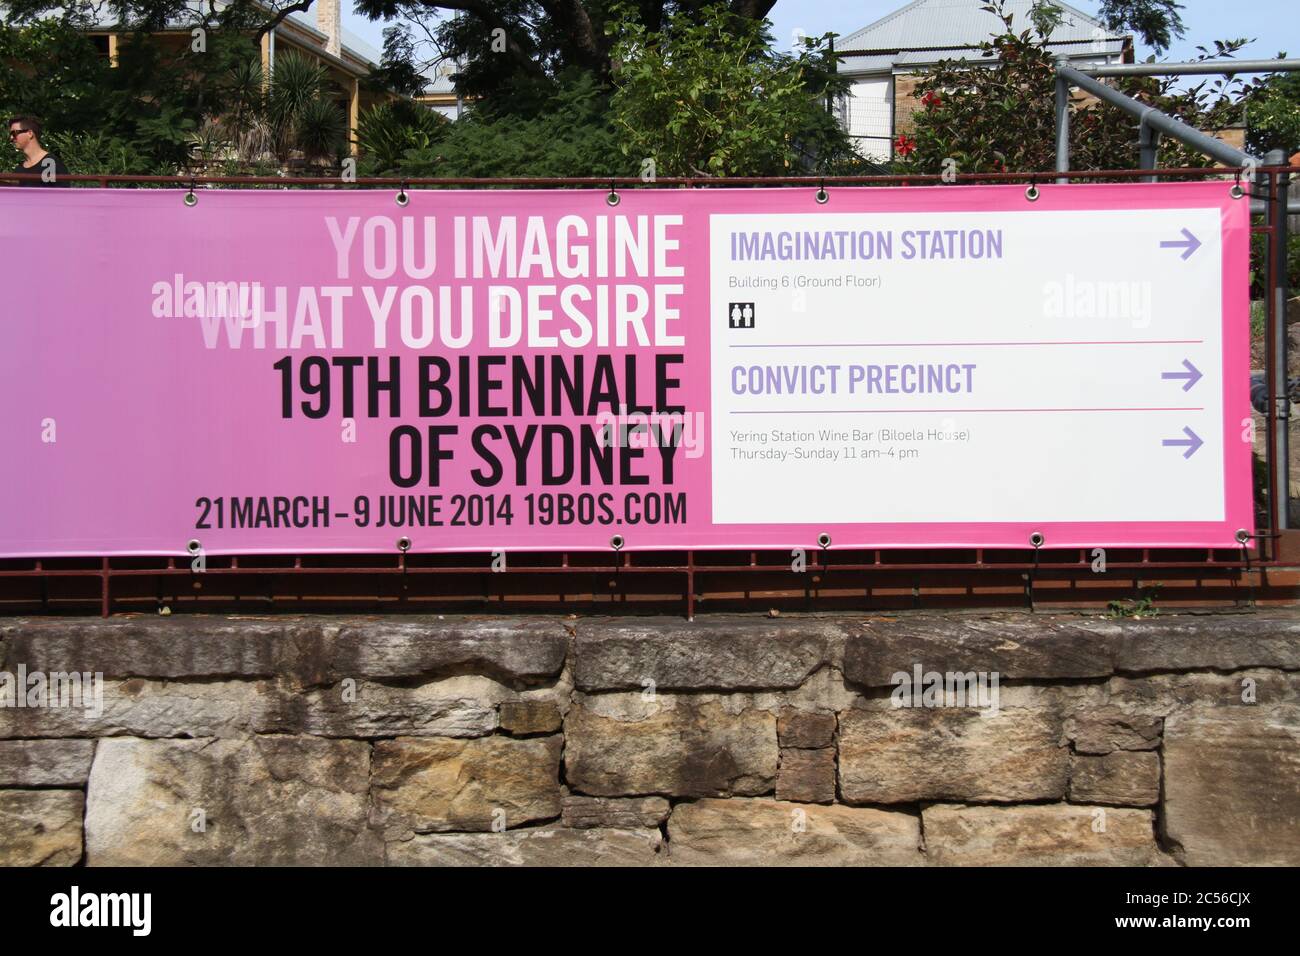 A sign on the Upper Island of Cockatoo Island encourages visitors to the 19th Biennale of Sydney to imagine what they desire and gives directions to t Stock Photo